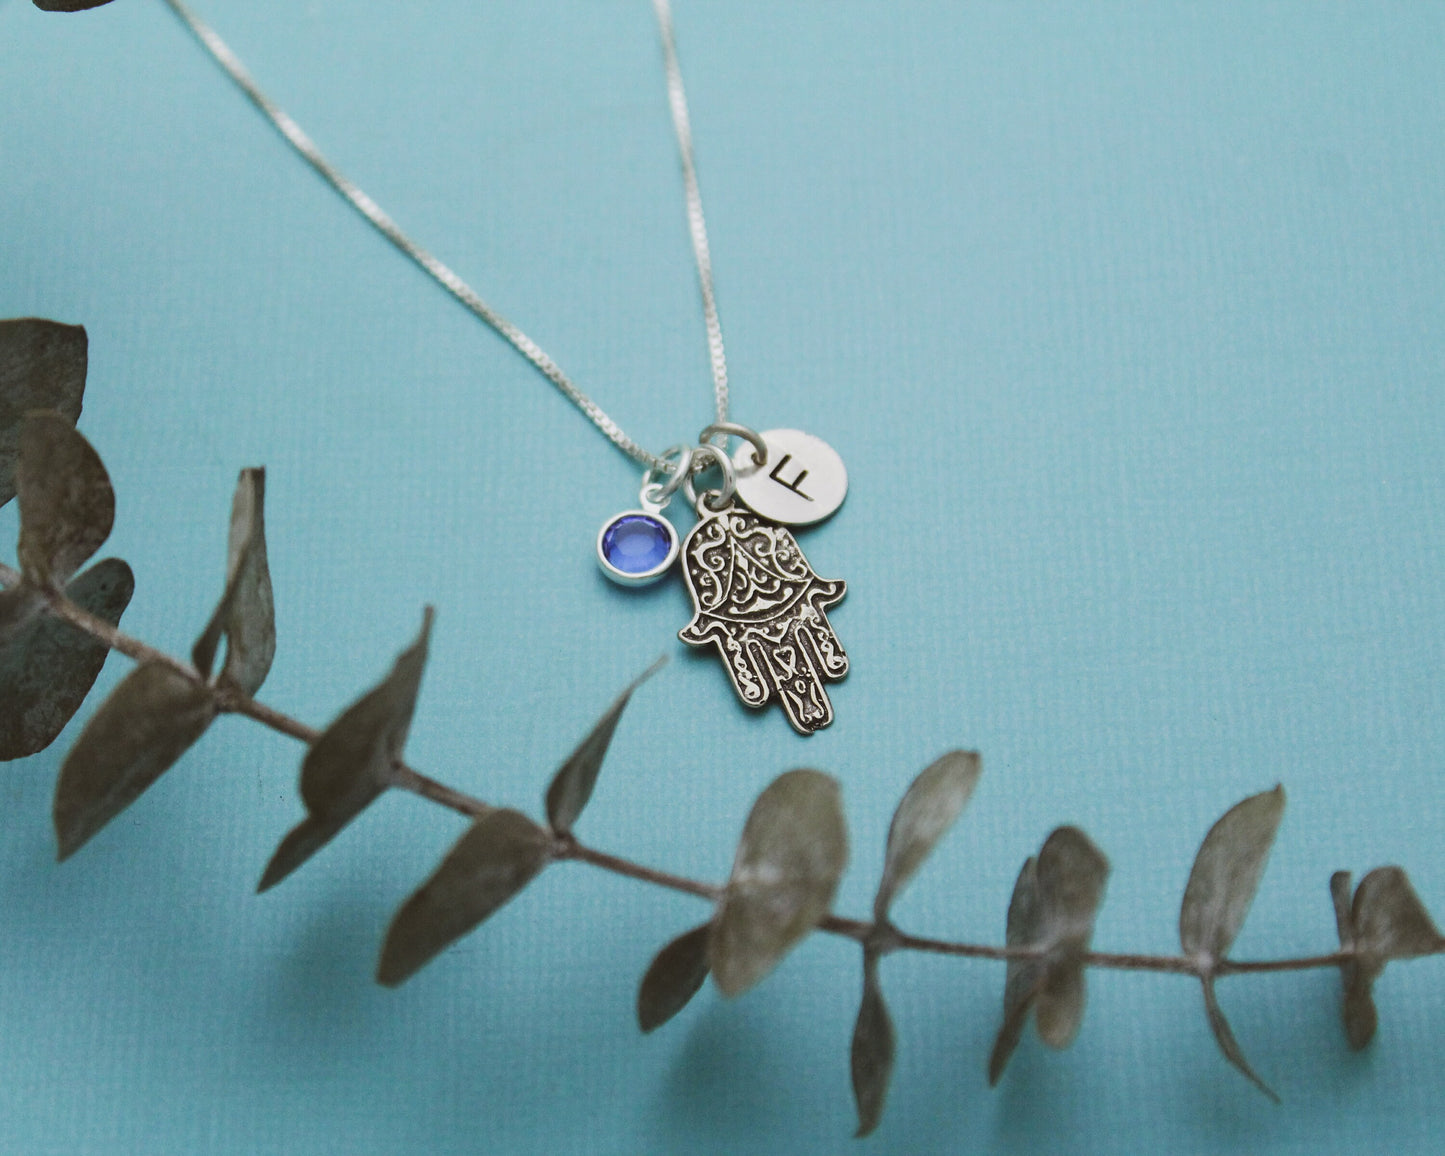 Hamsa Hand Charm Necklace for Bat Mitzvah Personalized Sterling Silver Star of David Hand Stamped Jewelry, Cute Bat Mitzvah Jewelry, Gift